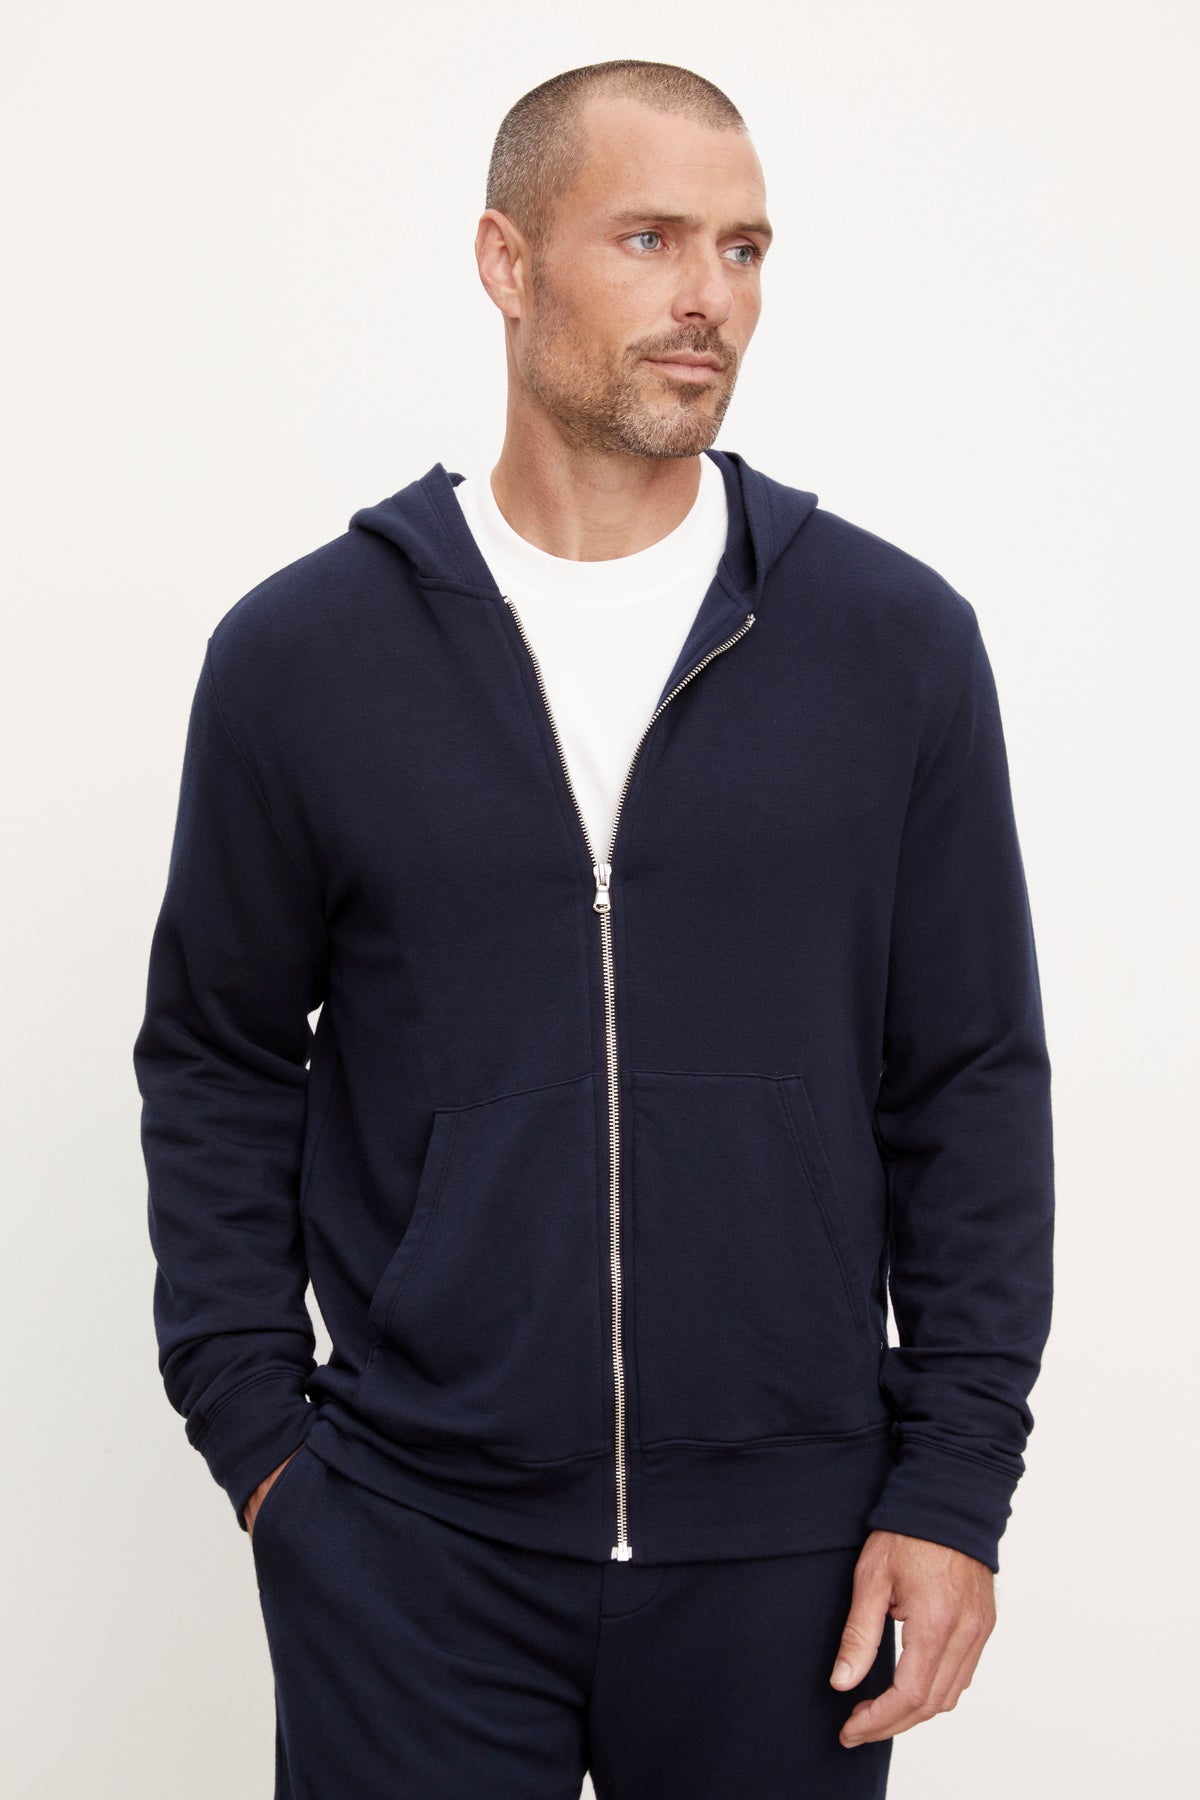 A man wearing a RODAN LUXE FLEECE ZIP HOODIE navy blue hoodie from Velvet by Graham & Spencer over a white t-shirt, standing against a neutral background, looking to his left.-36731041317057